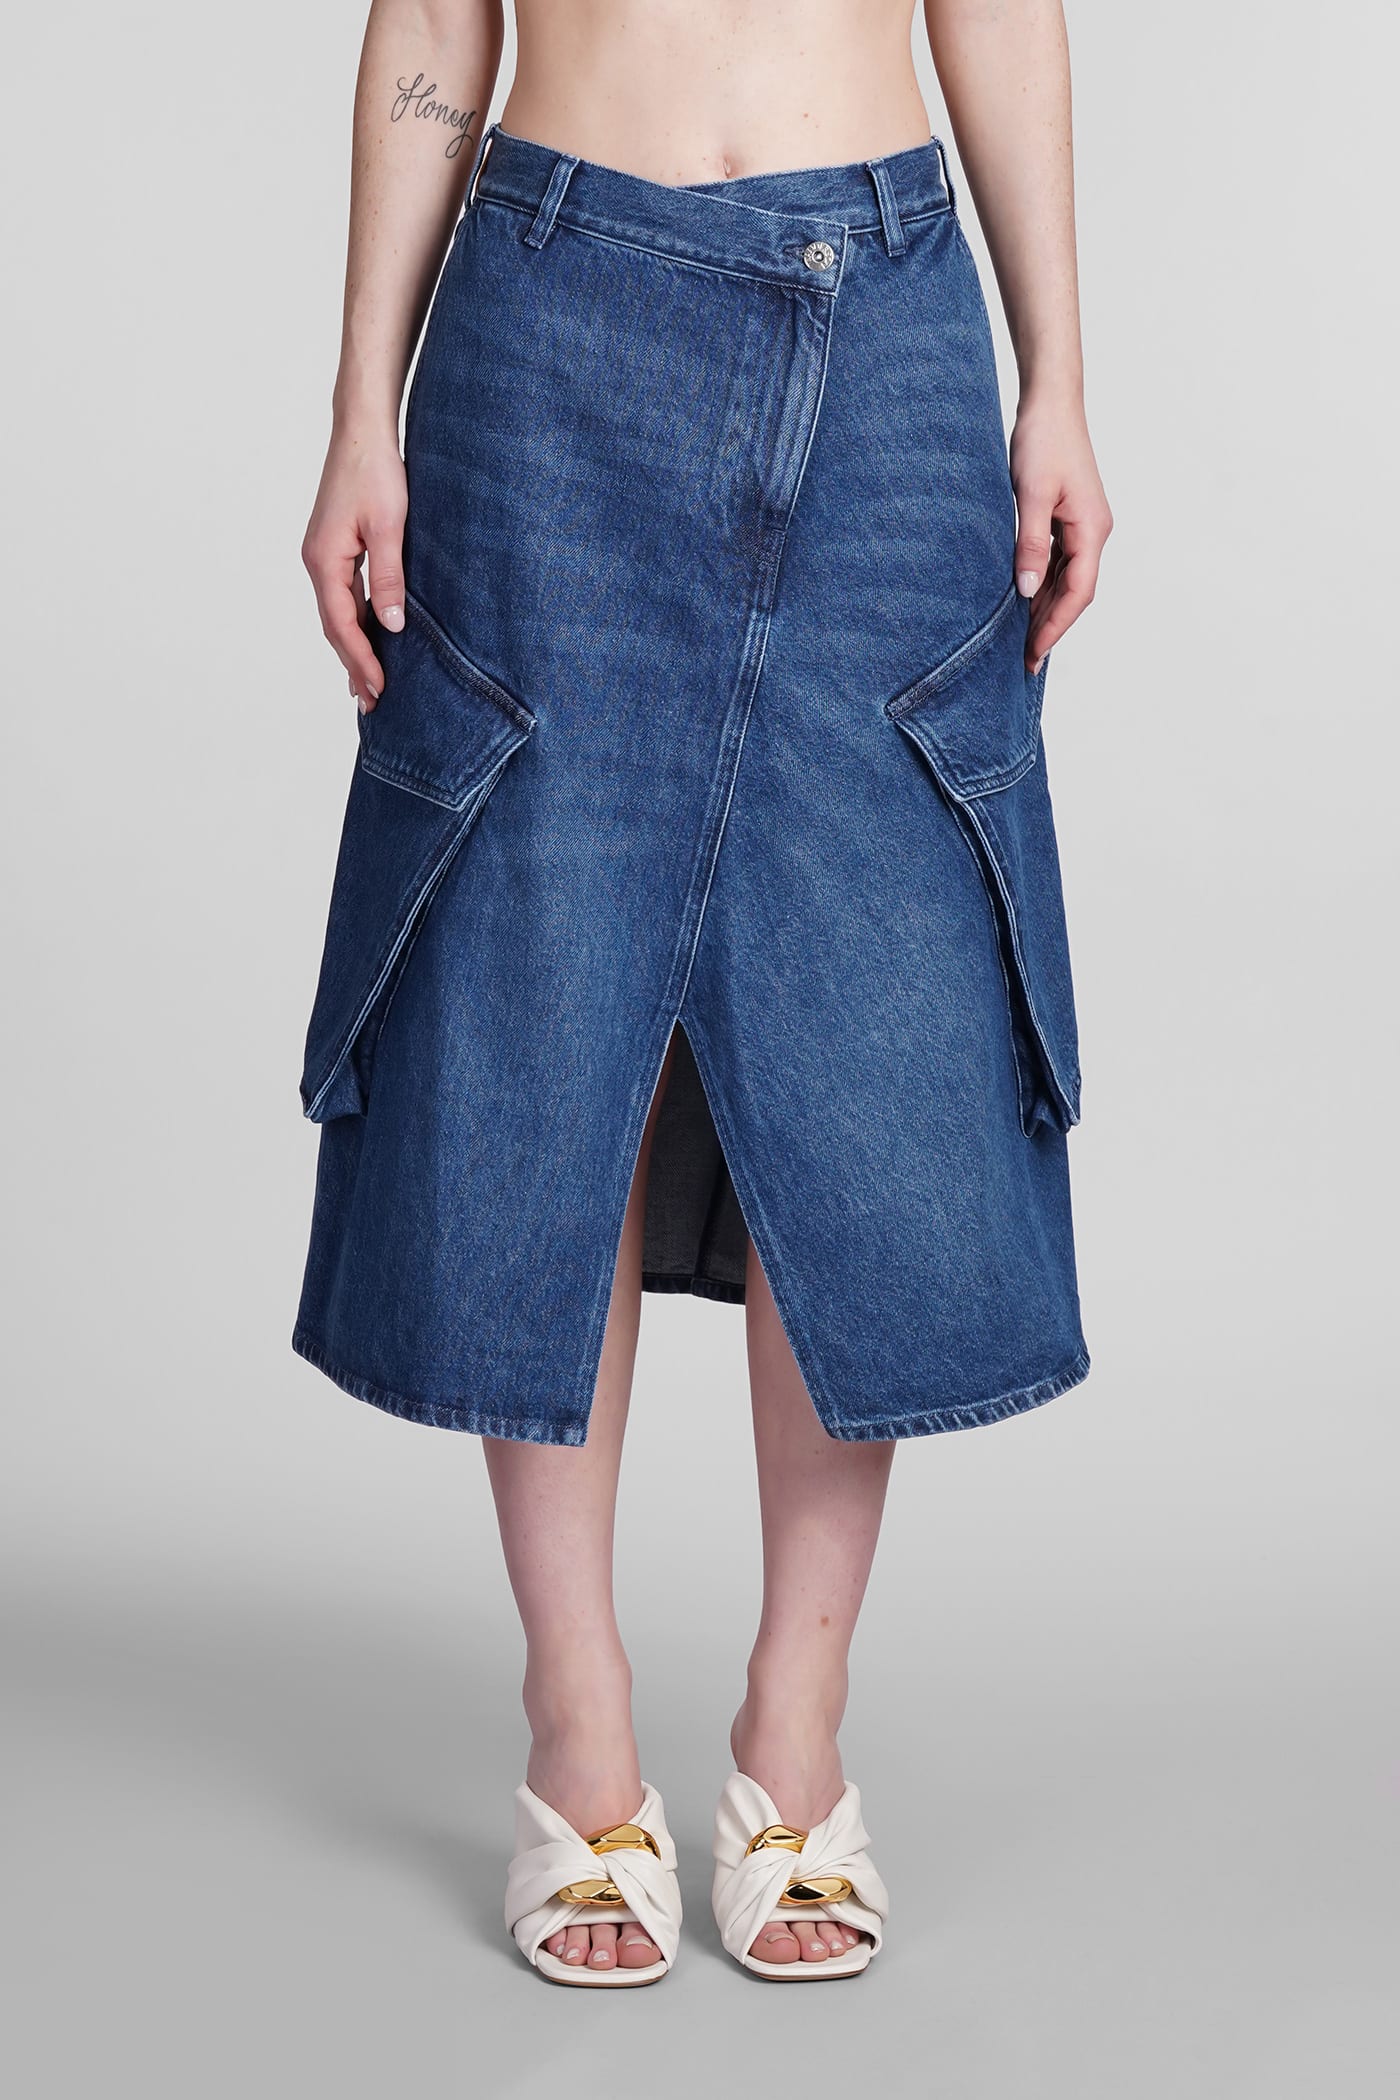 JW ANDERSON SKIRT IN BLUE COTTON